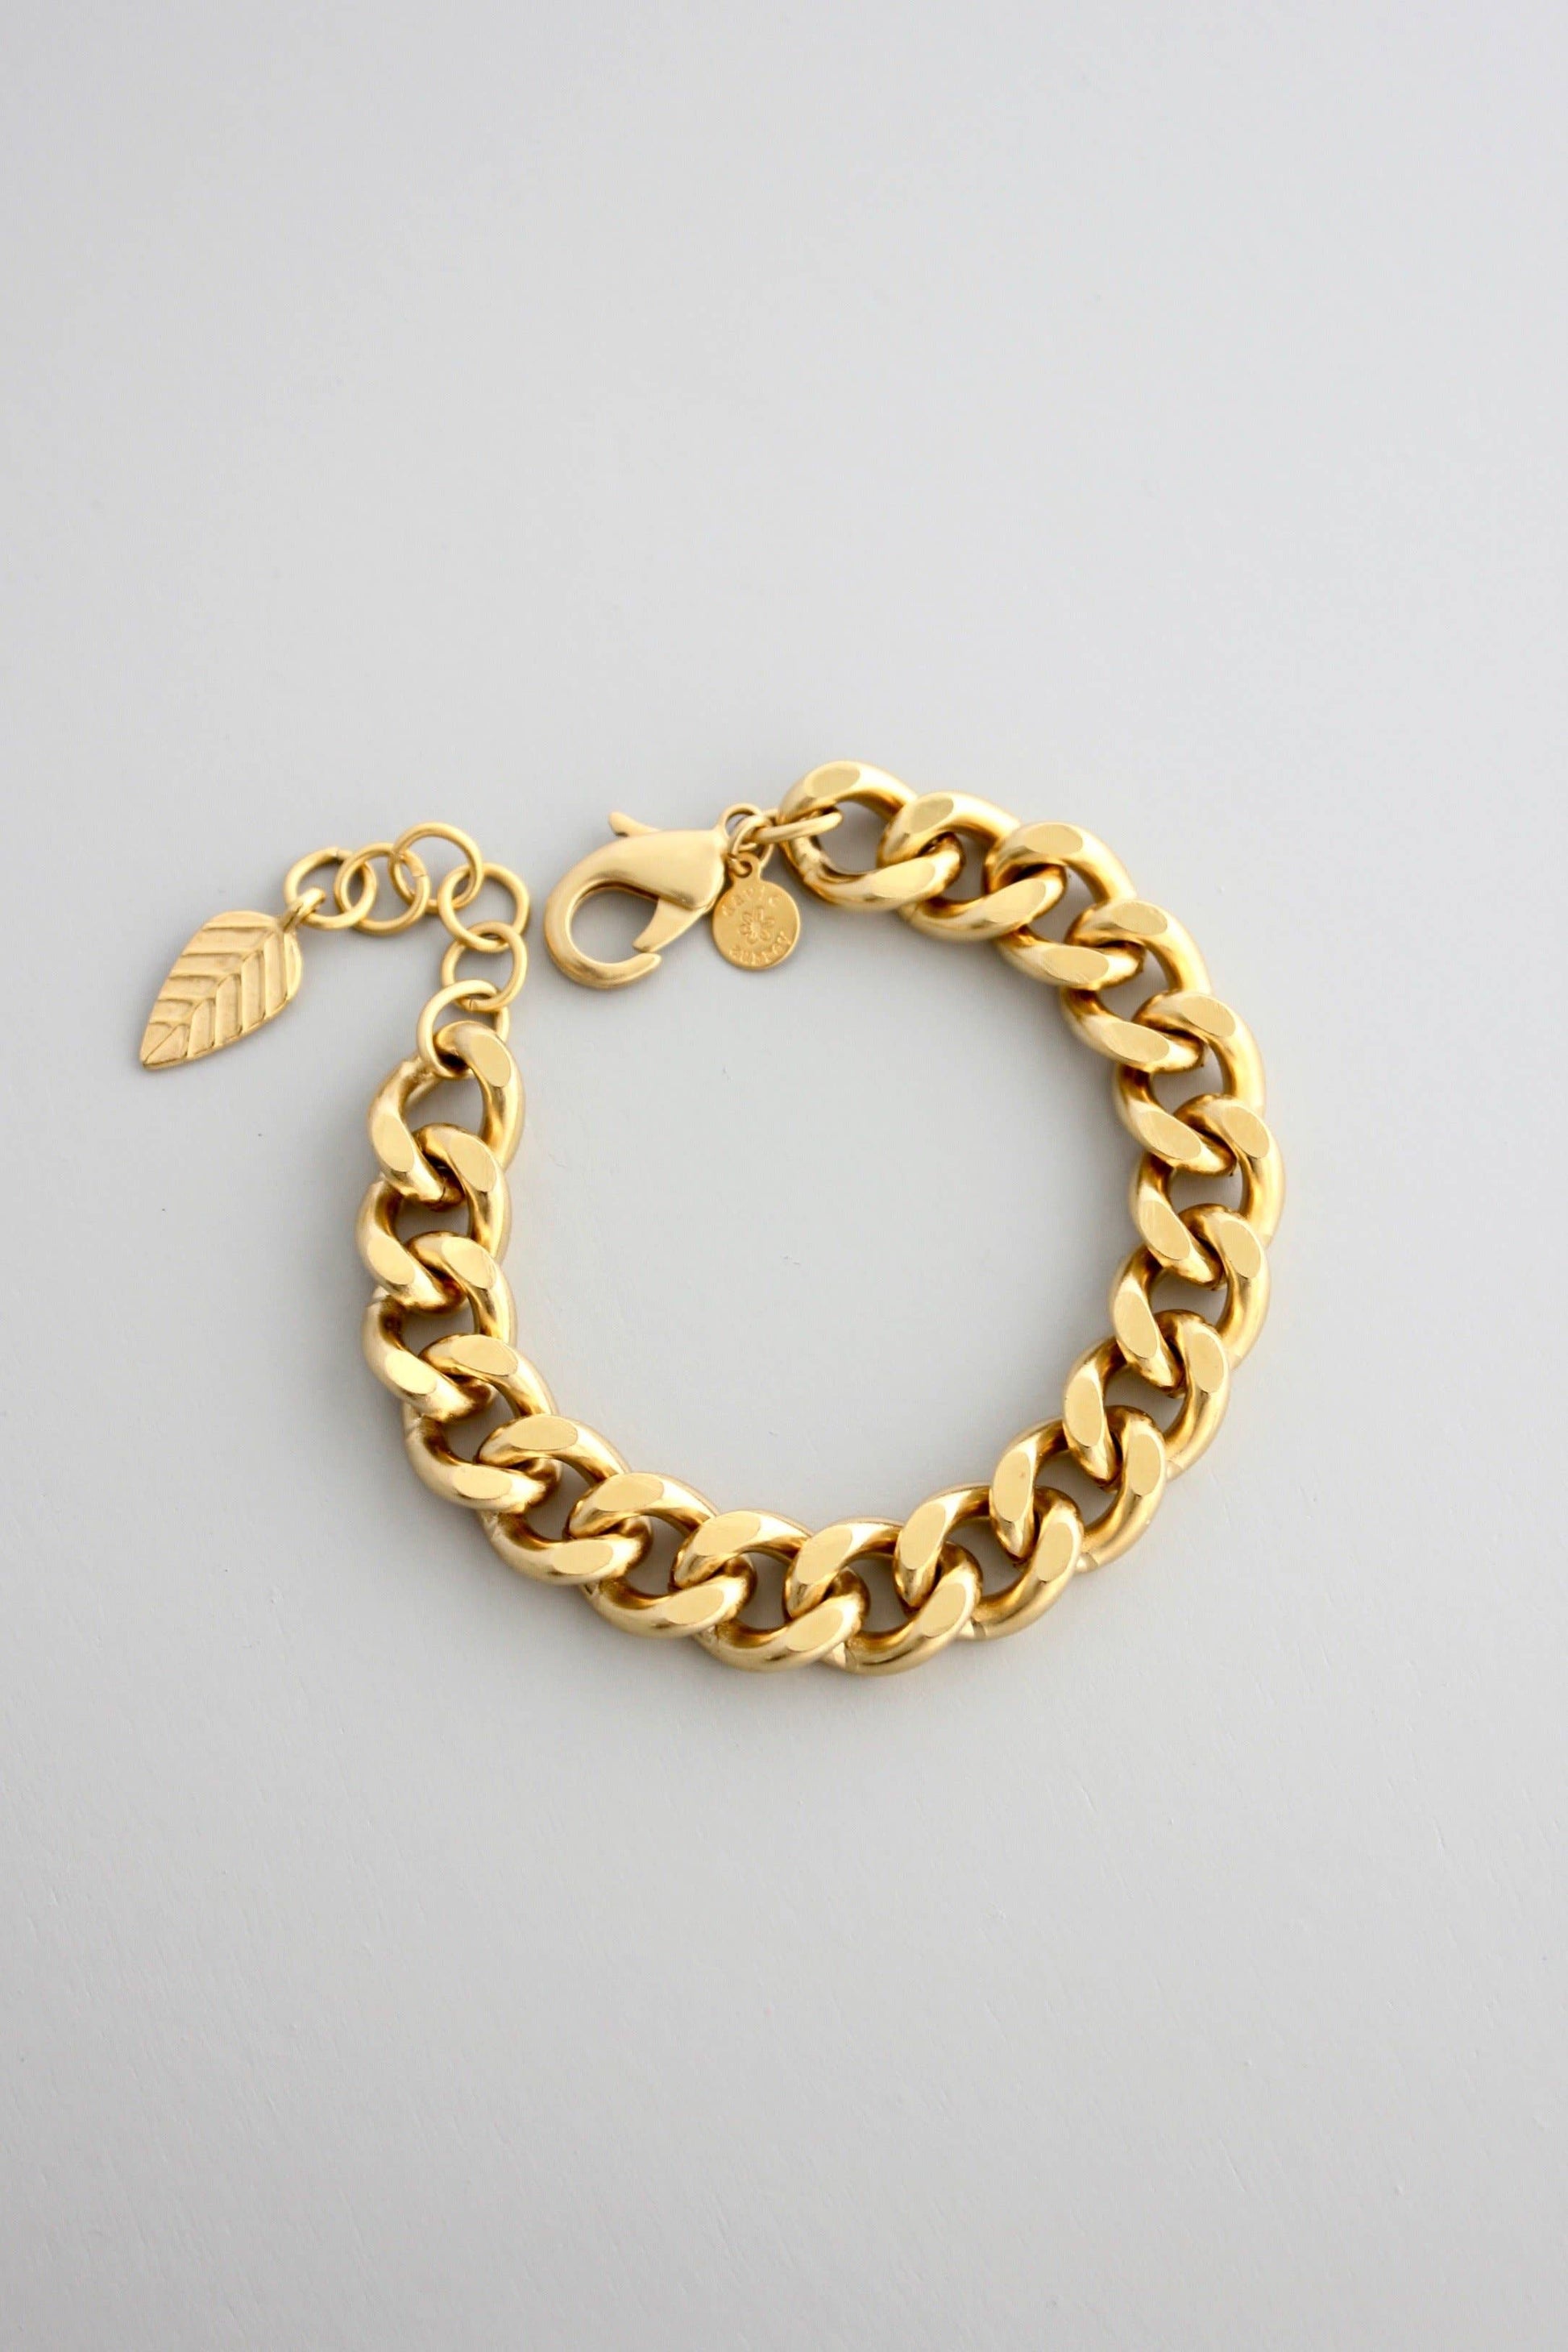 18k gold plated brass chain bracelet with one inch extender against a grey background